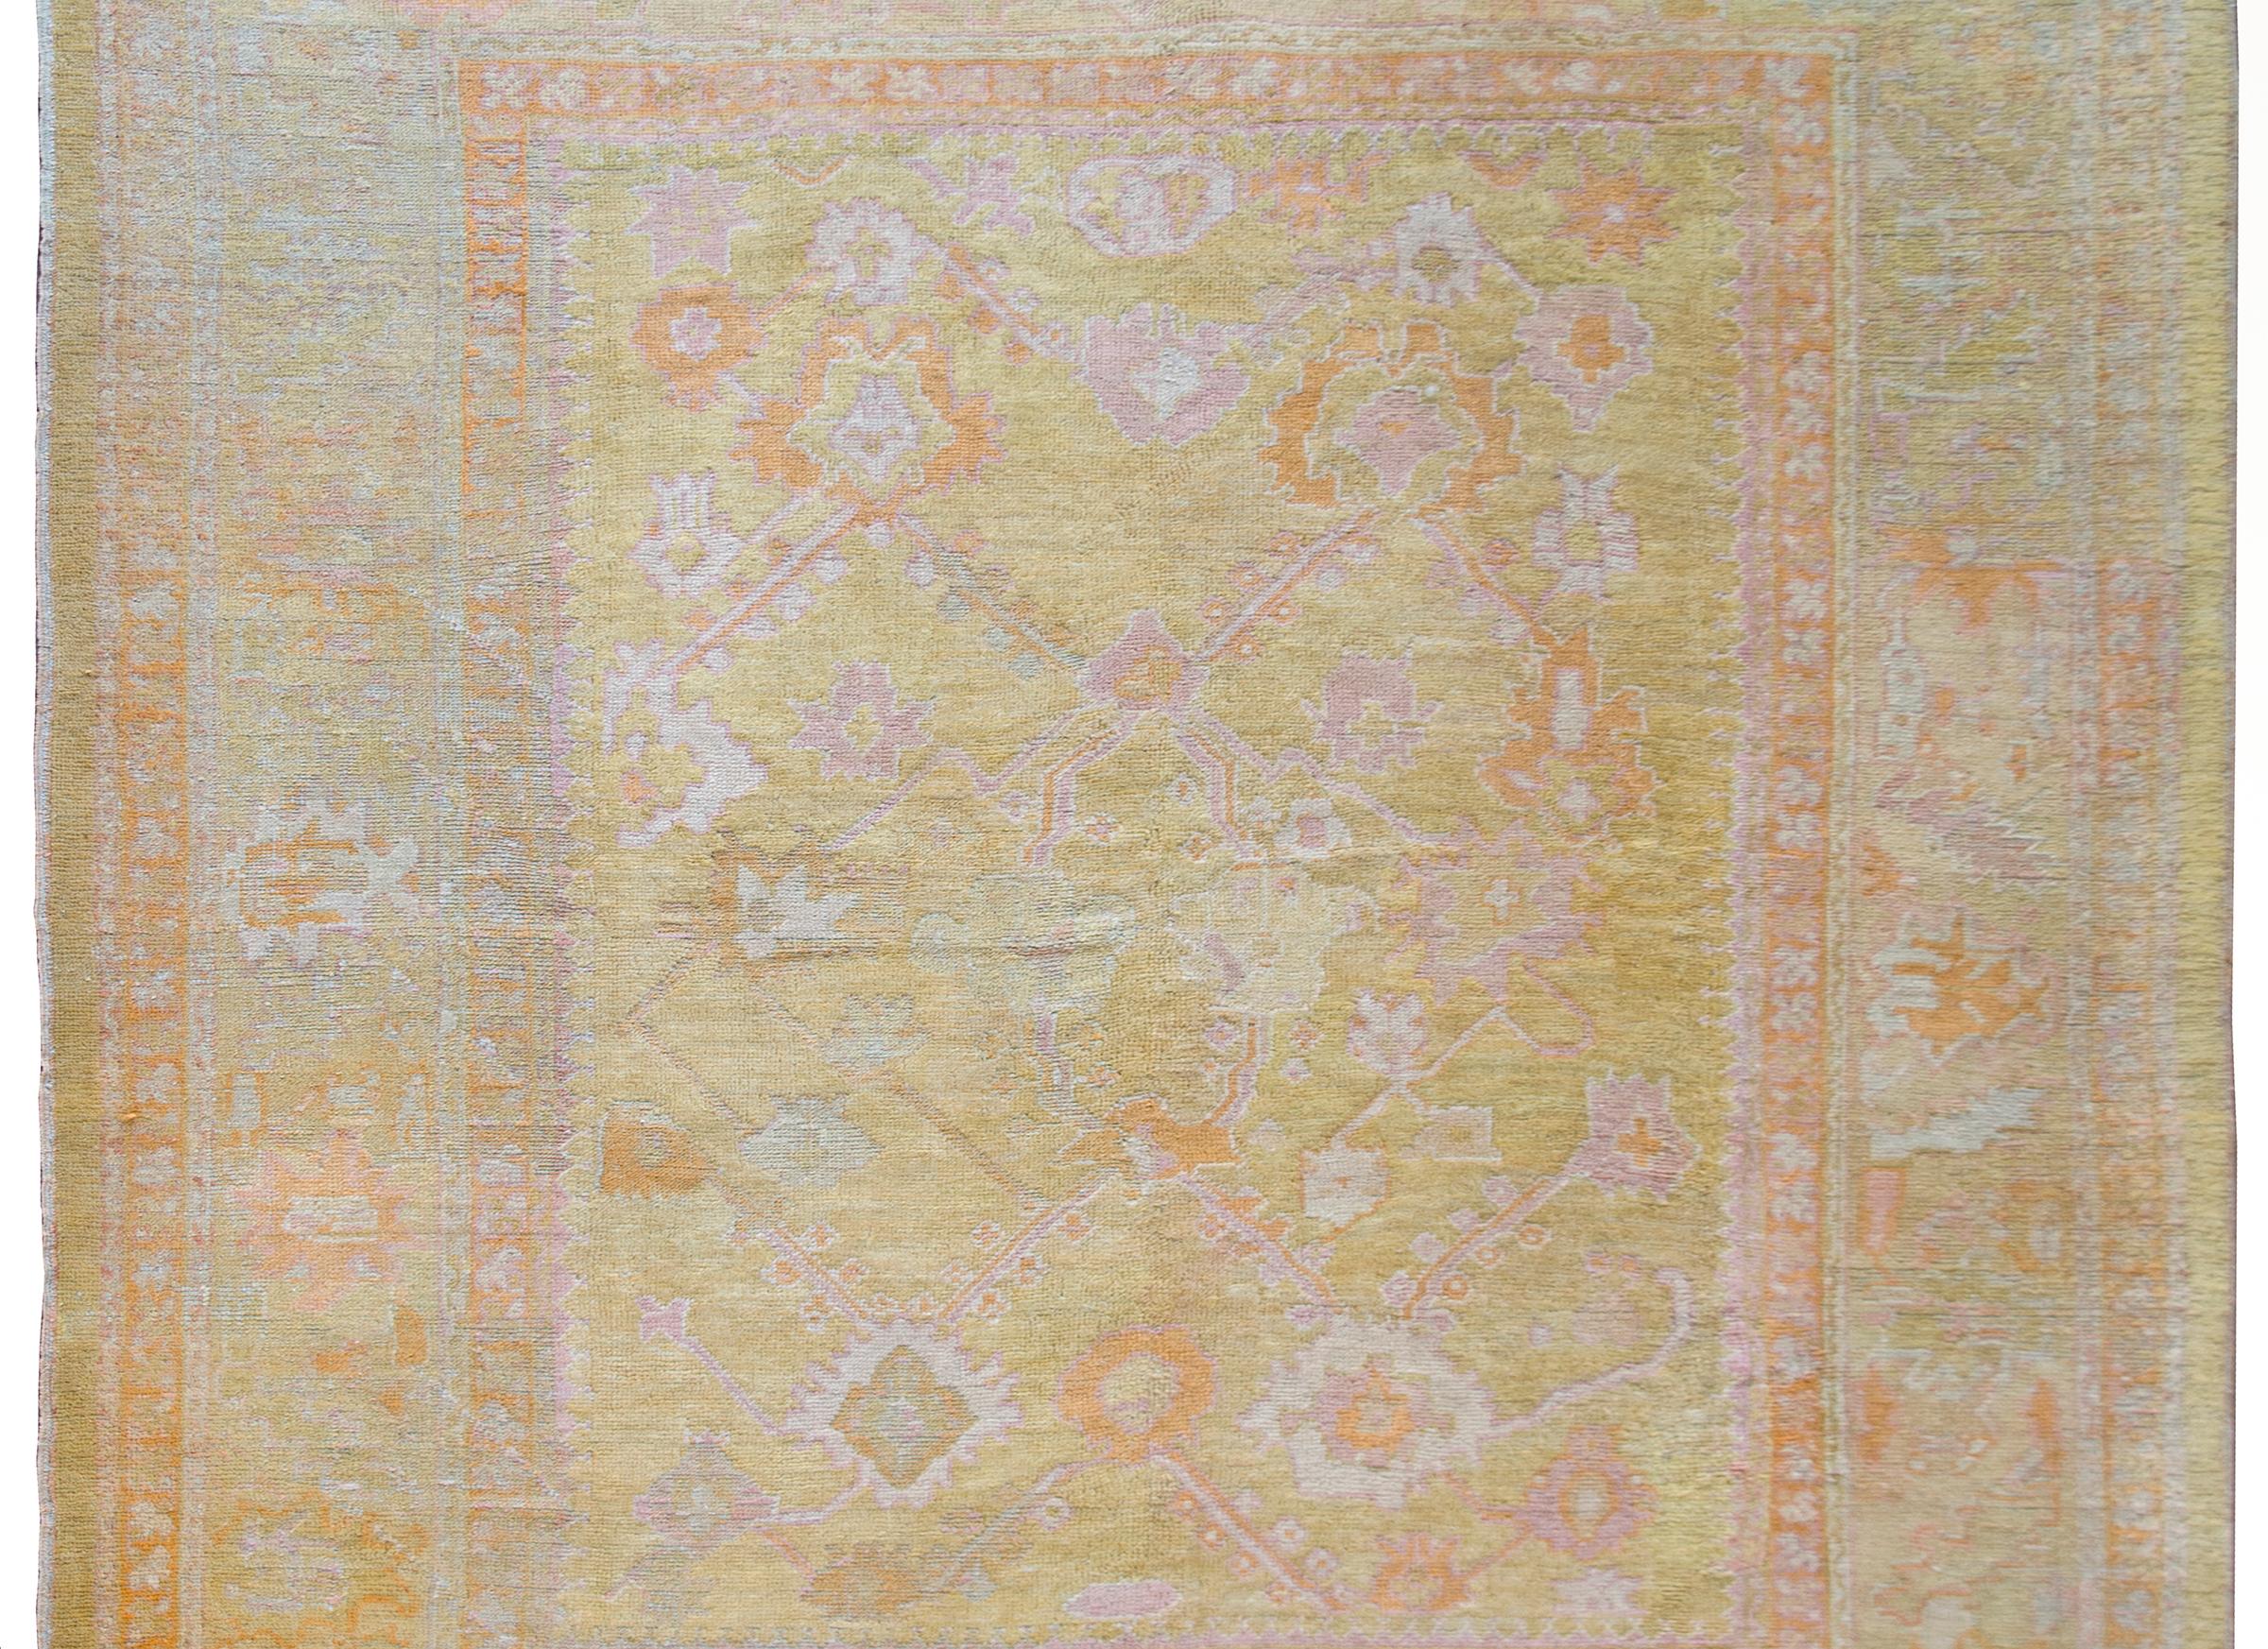 A stunning early 20th century Turkish Oushak rug with a beautiful large-scale stylized trellis floral pattern with pink, orange and yellow flowers and pink and white vines, all set against a gold background and surrounded by a border composed of